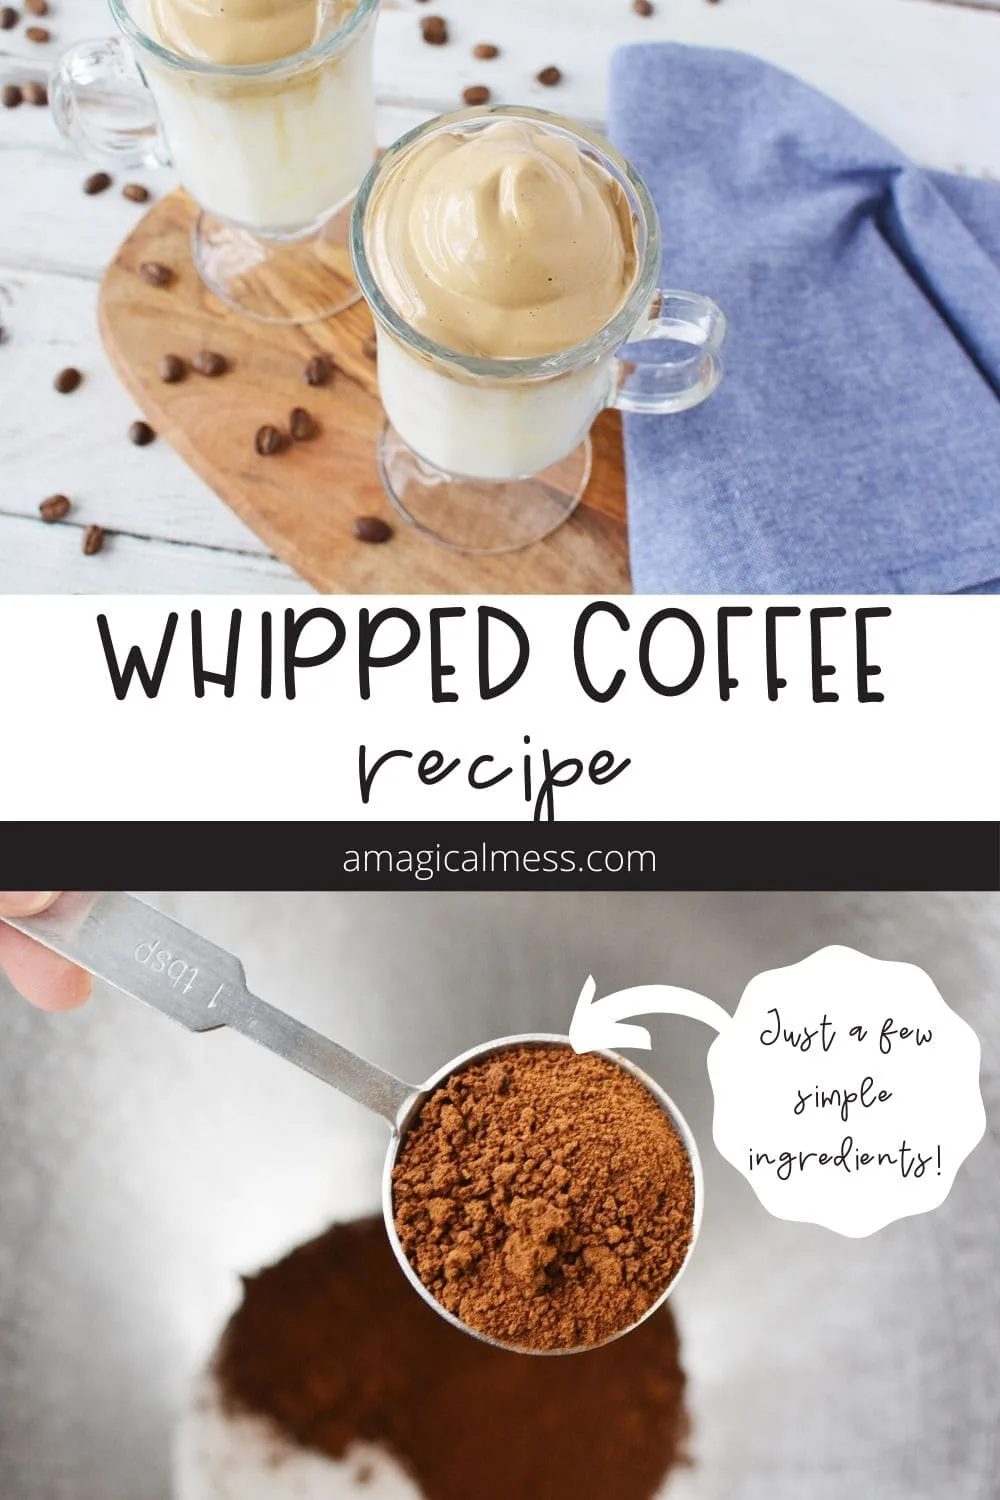 Whipped coffee in a mug and instant coffee in a mixing bowl